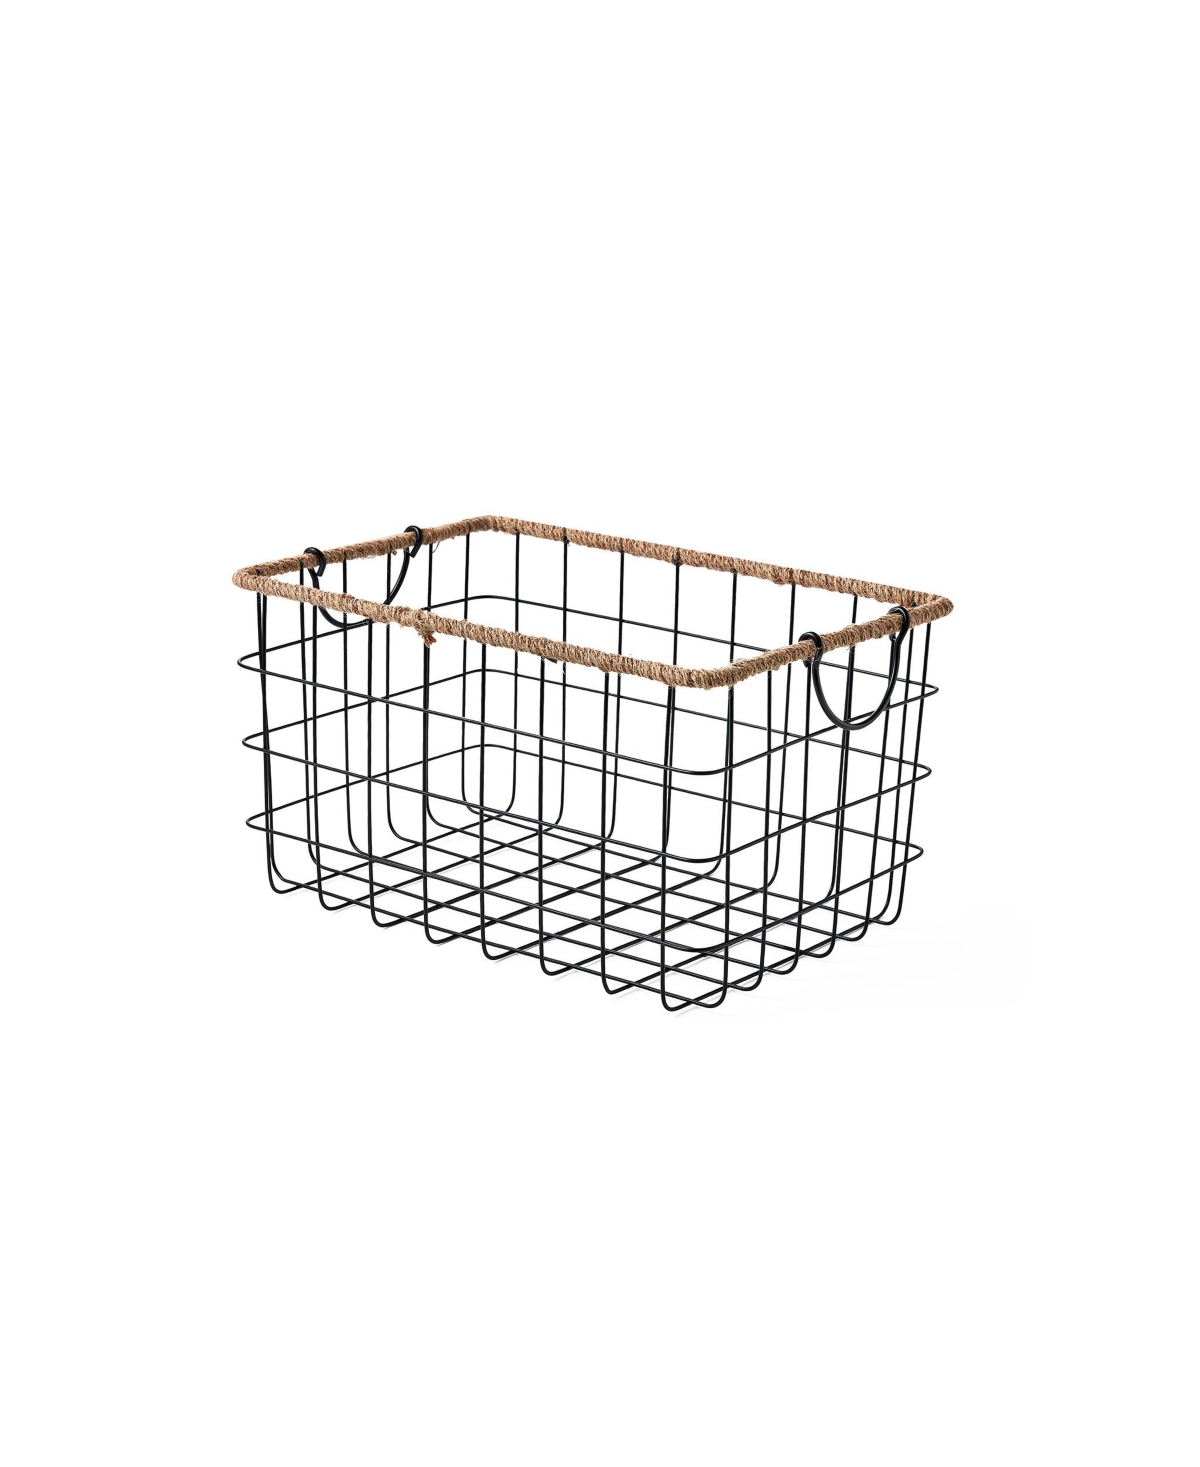 Shop Baum Rectangular Grid Black Wire Baskets With Jute Rim And Fold Down Ear Handles, Set Of 3 In Black,natural